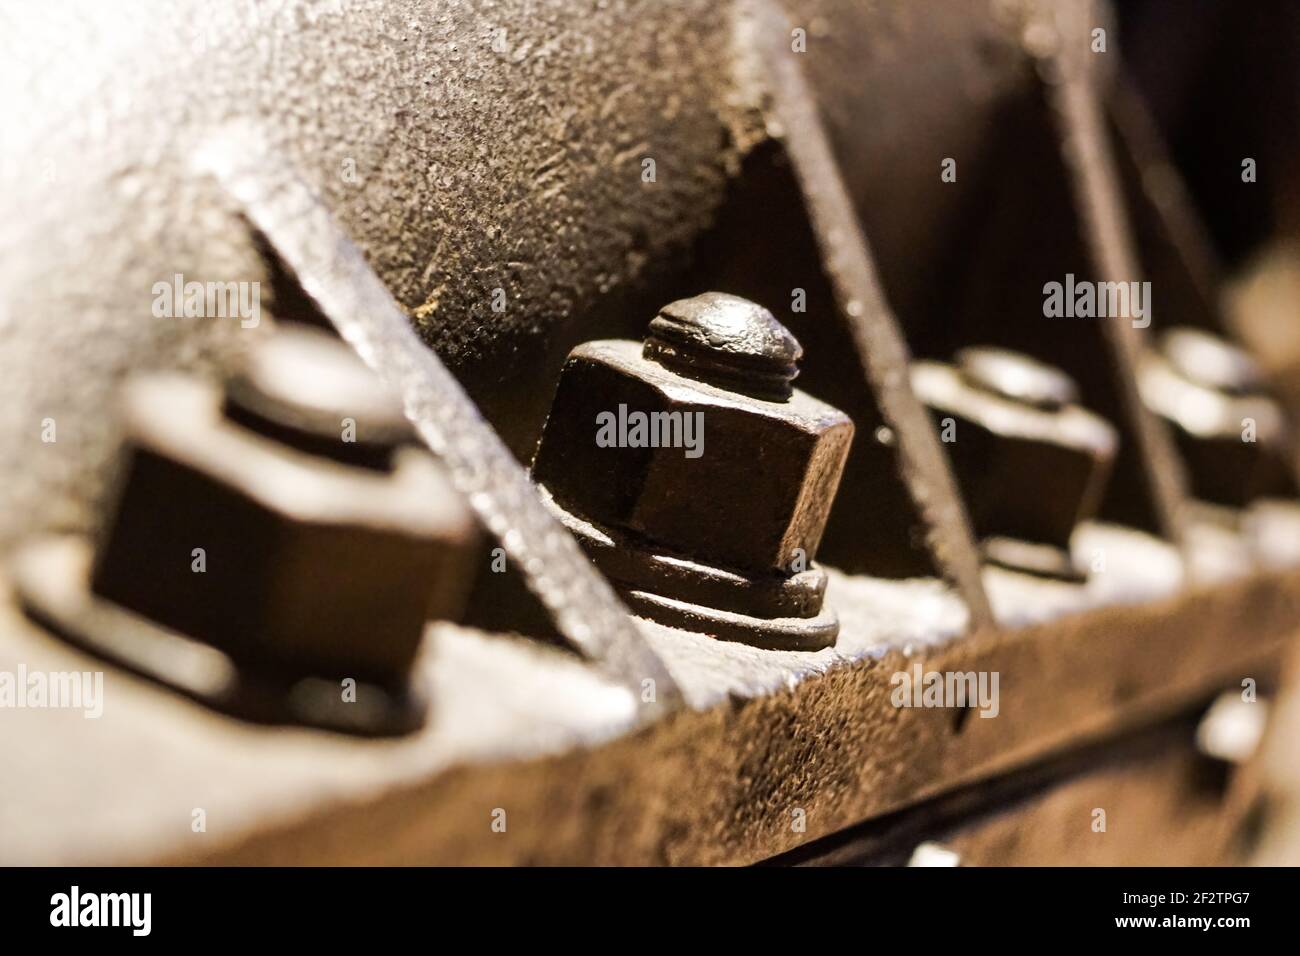 Nut and bolt close up with shallow Dof Stock Photo